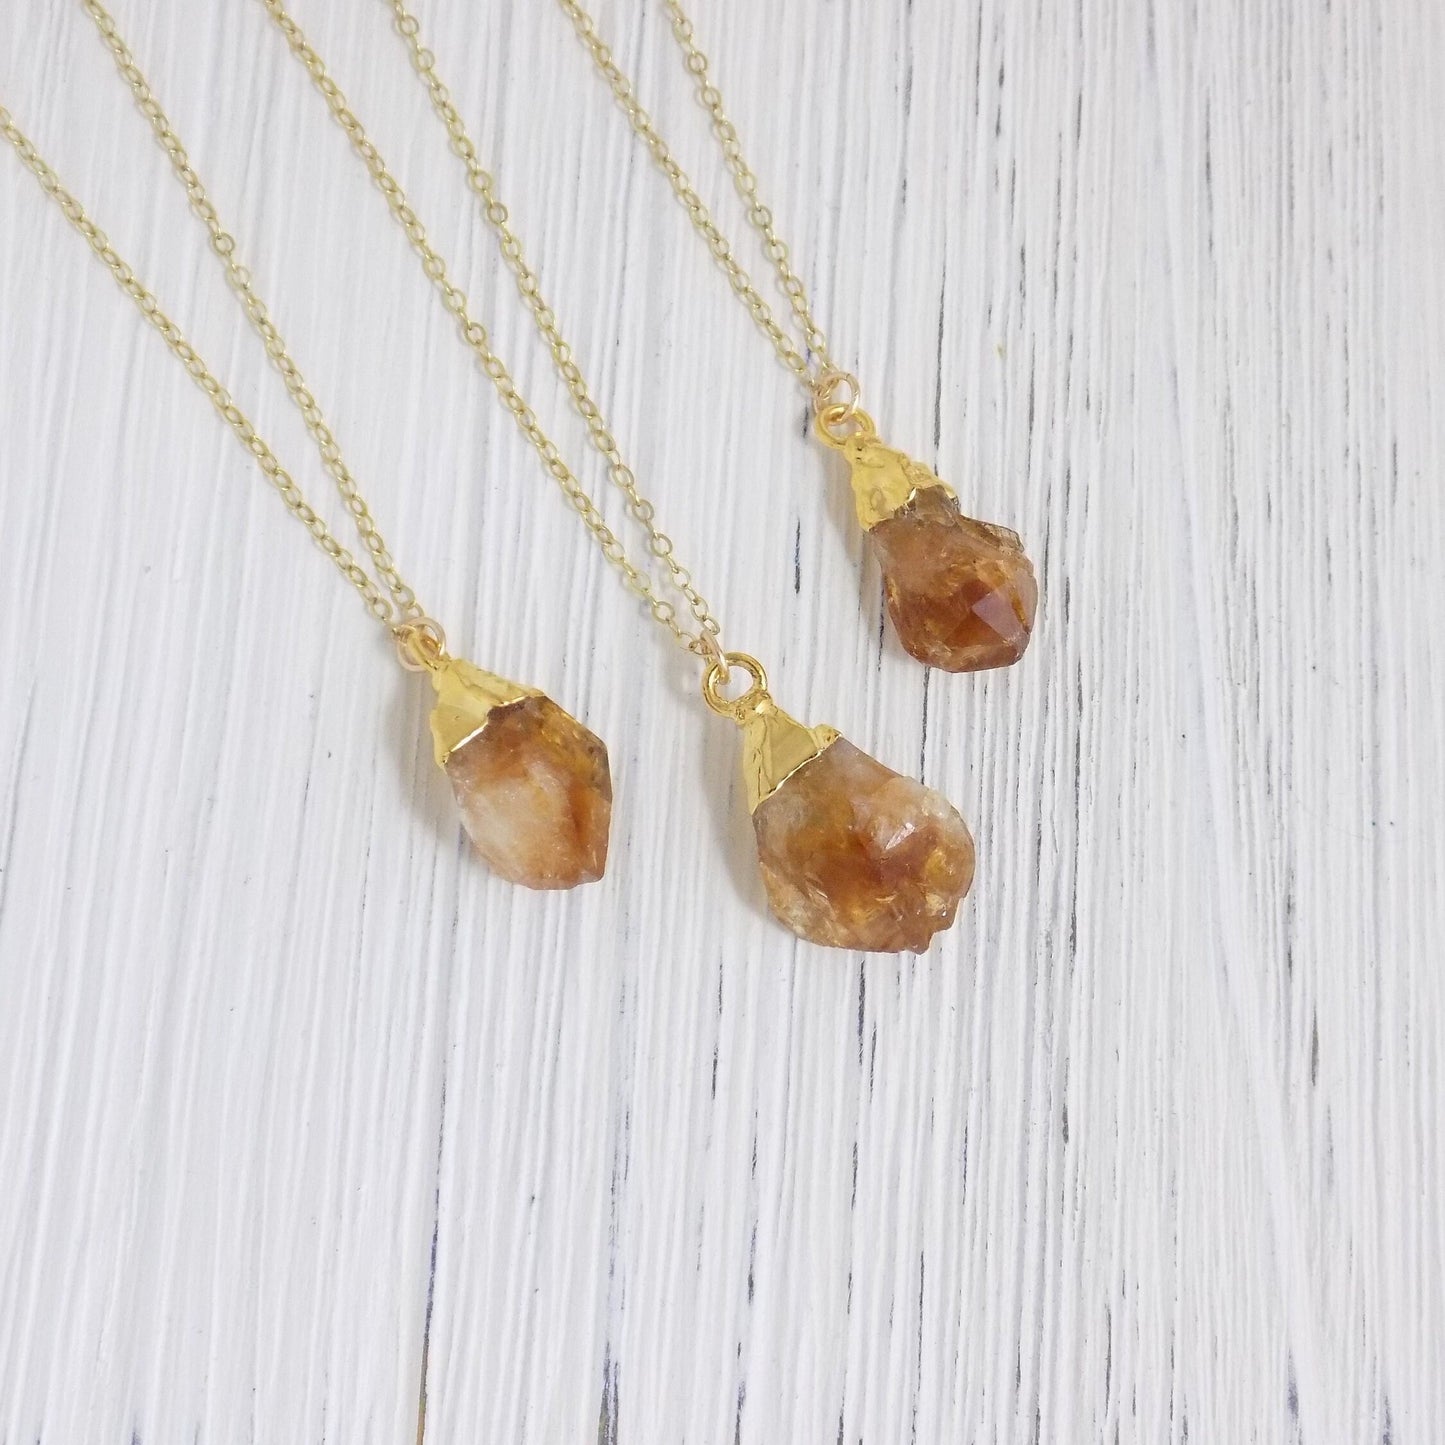 Raw Citrine Crystal Necklace Gold, Personalized Citrine Pendant, November Birthstone, Christmas Gift For Best Friend, R13-20